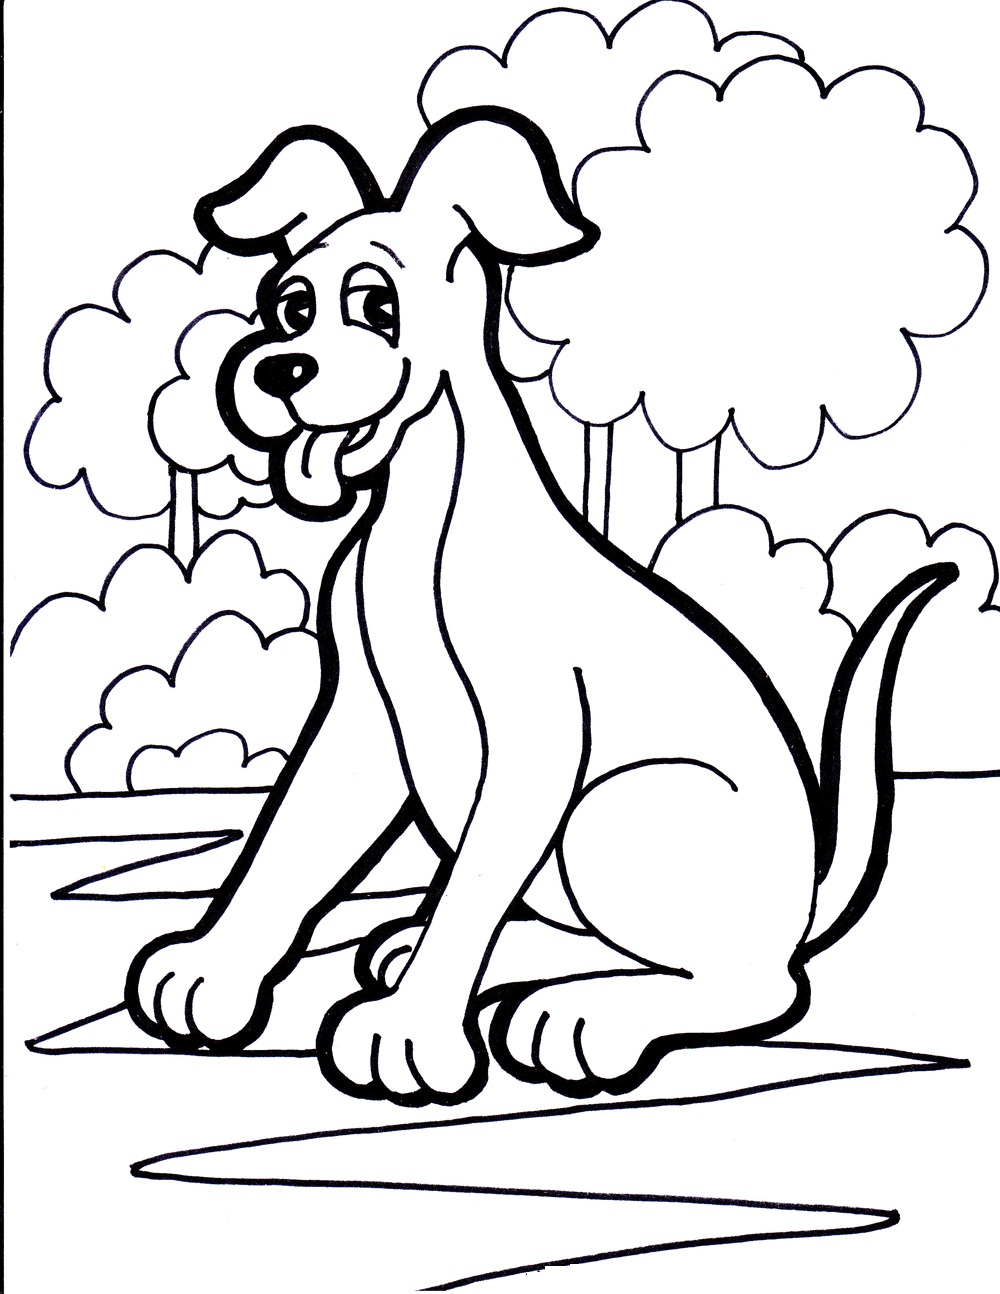 Puppy Coloring Sheets 4